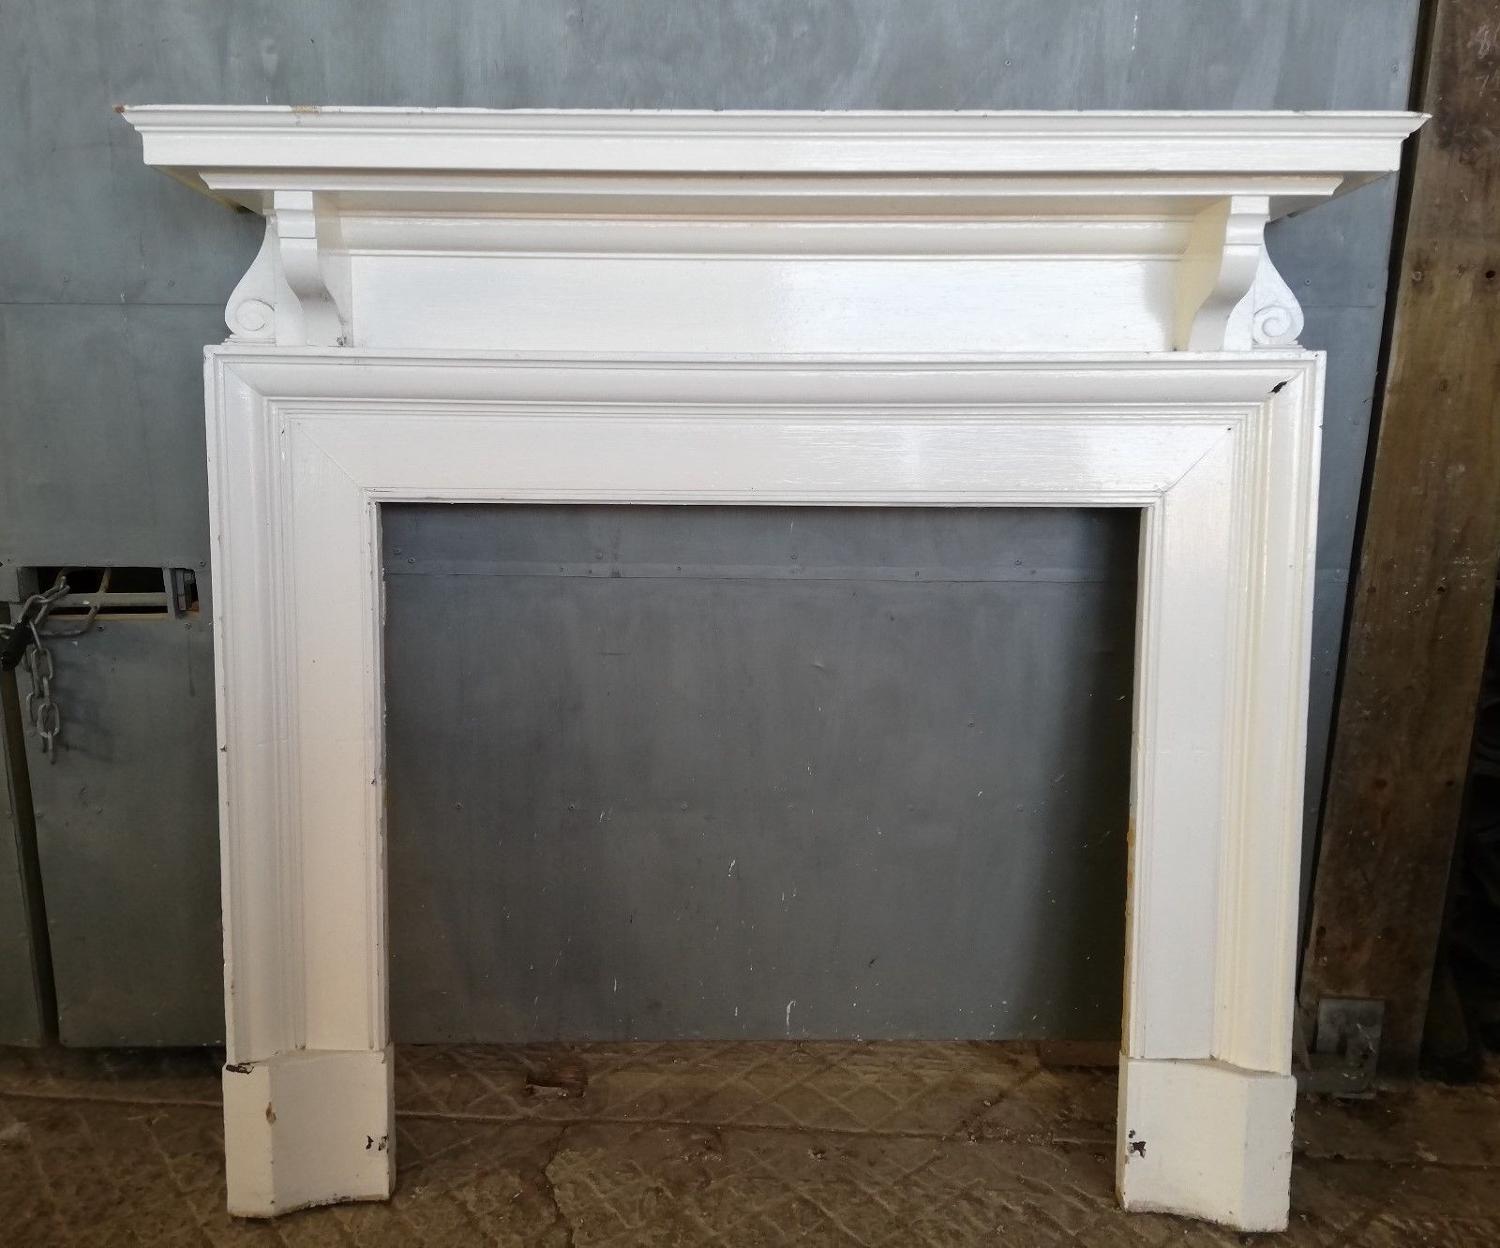 FS0048 LARGE EDWARDIAN PAINTED PINE FIRE SURROUND FOR WOOD BURNER